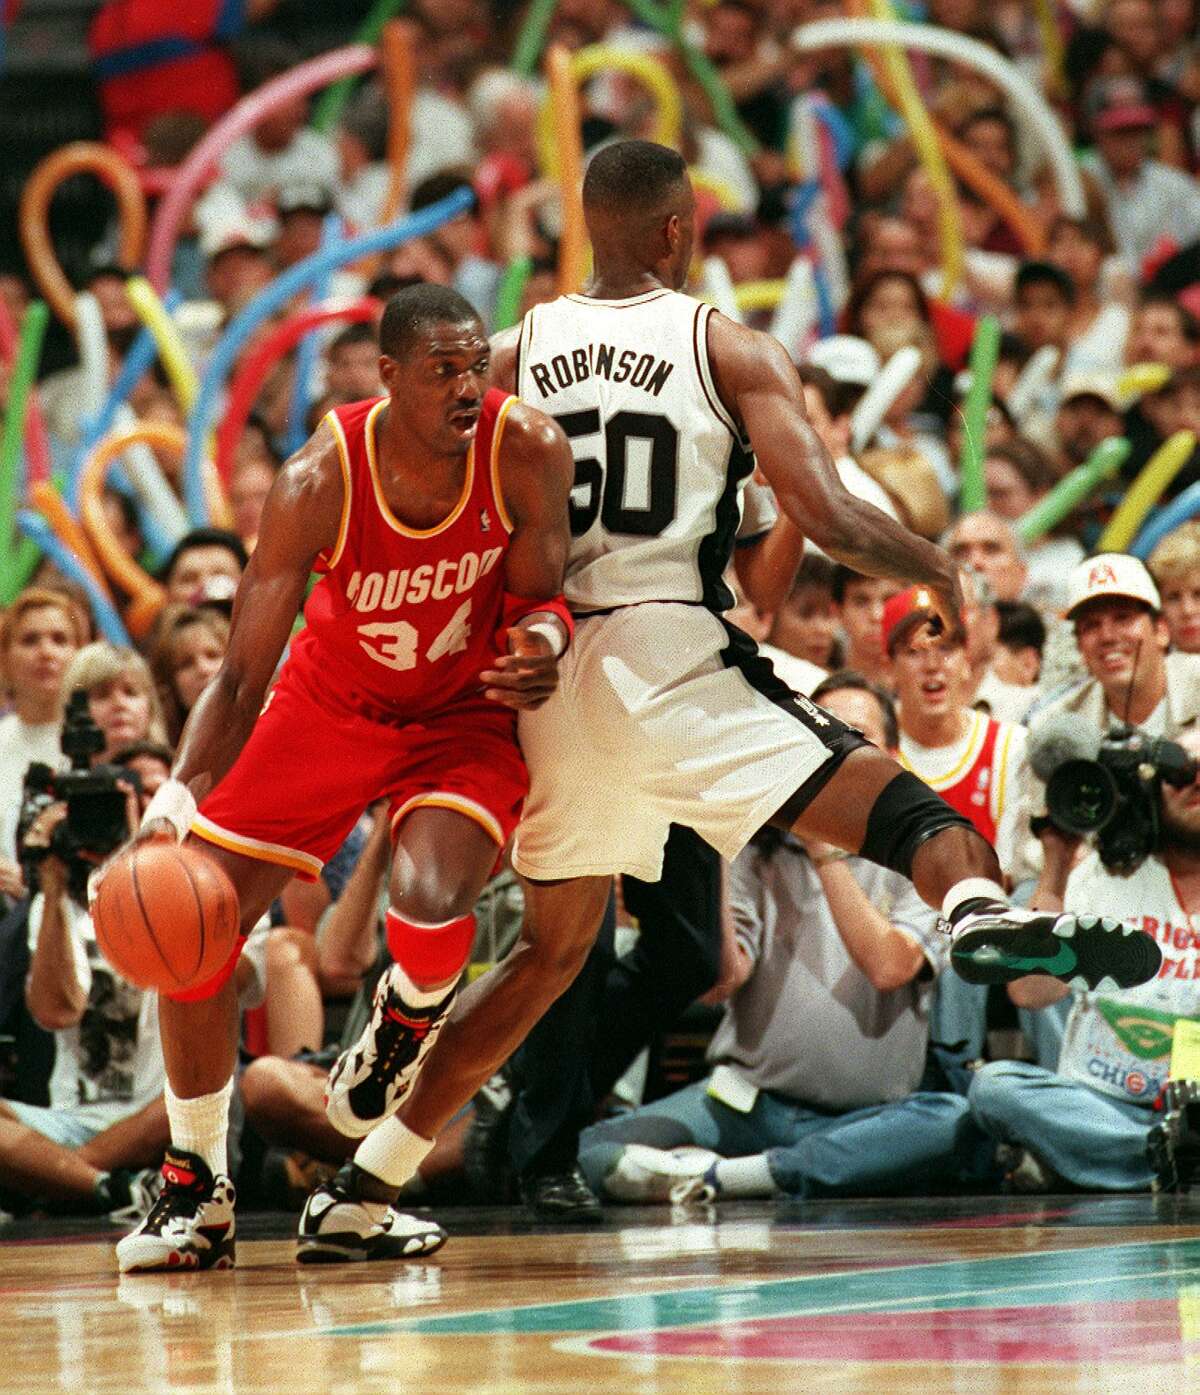 FILE -- DREAM SHAKE -- Hakeem Olajuwon is pictured here doing the famous "dream shake" which caught David Robinson off guard during the playoffs at the Alamodome on 5/24/1995. SPRUS V. ROCKETS -- Photo by Doug Sehres / Staff